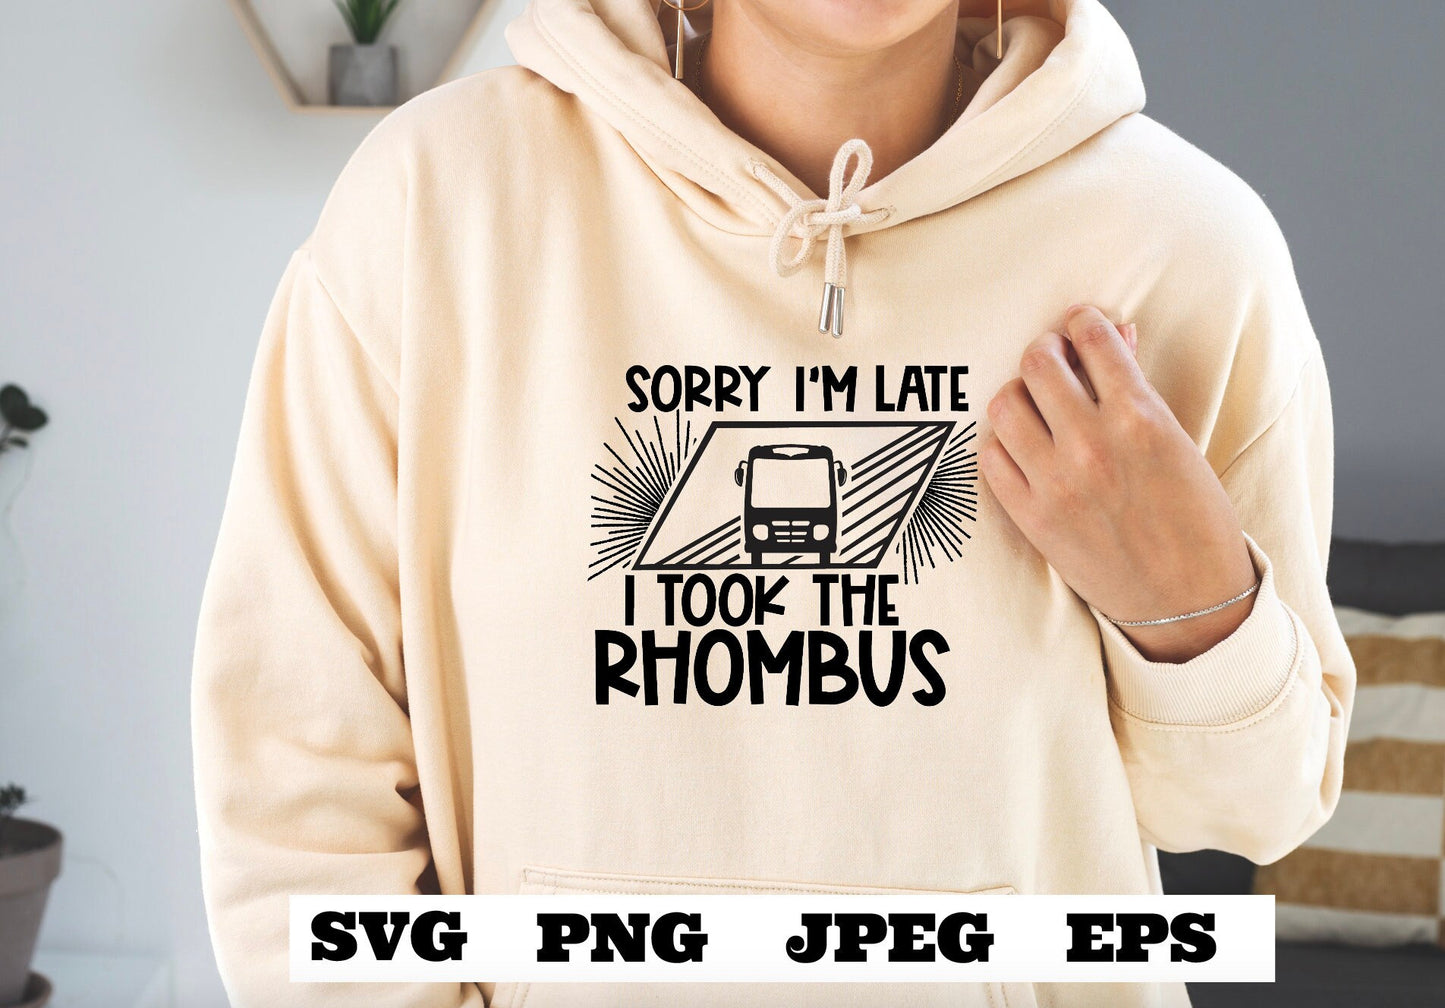 Sorry I'm late I took the Rhombus SVG png jpeg eps - Funny Teacher Math Lover Geometry Shirt Cut File - Sublimation - Download Teacher Math